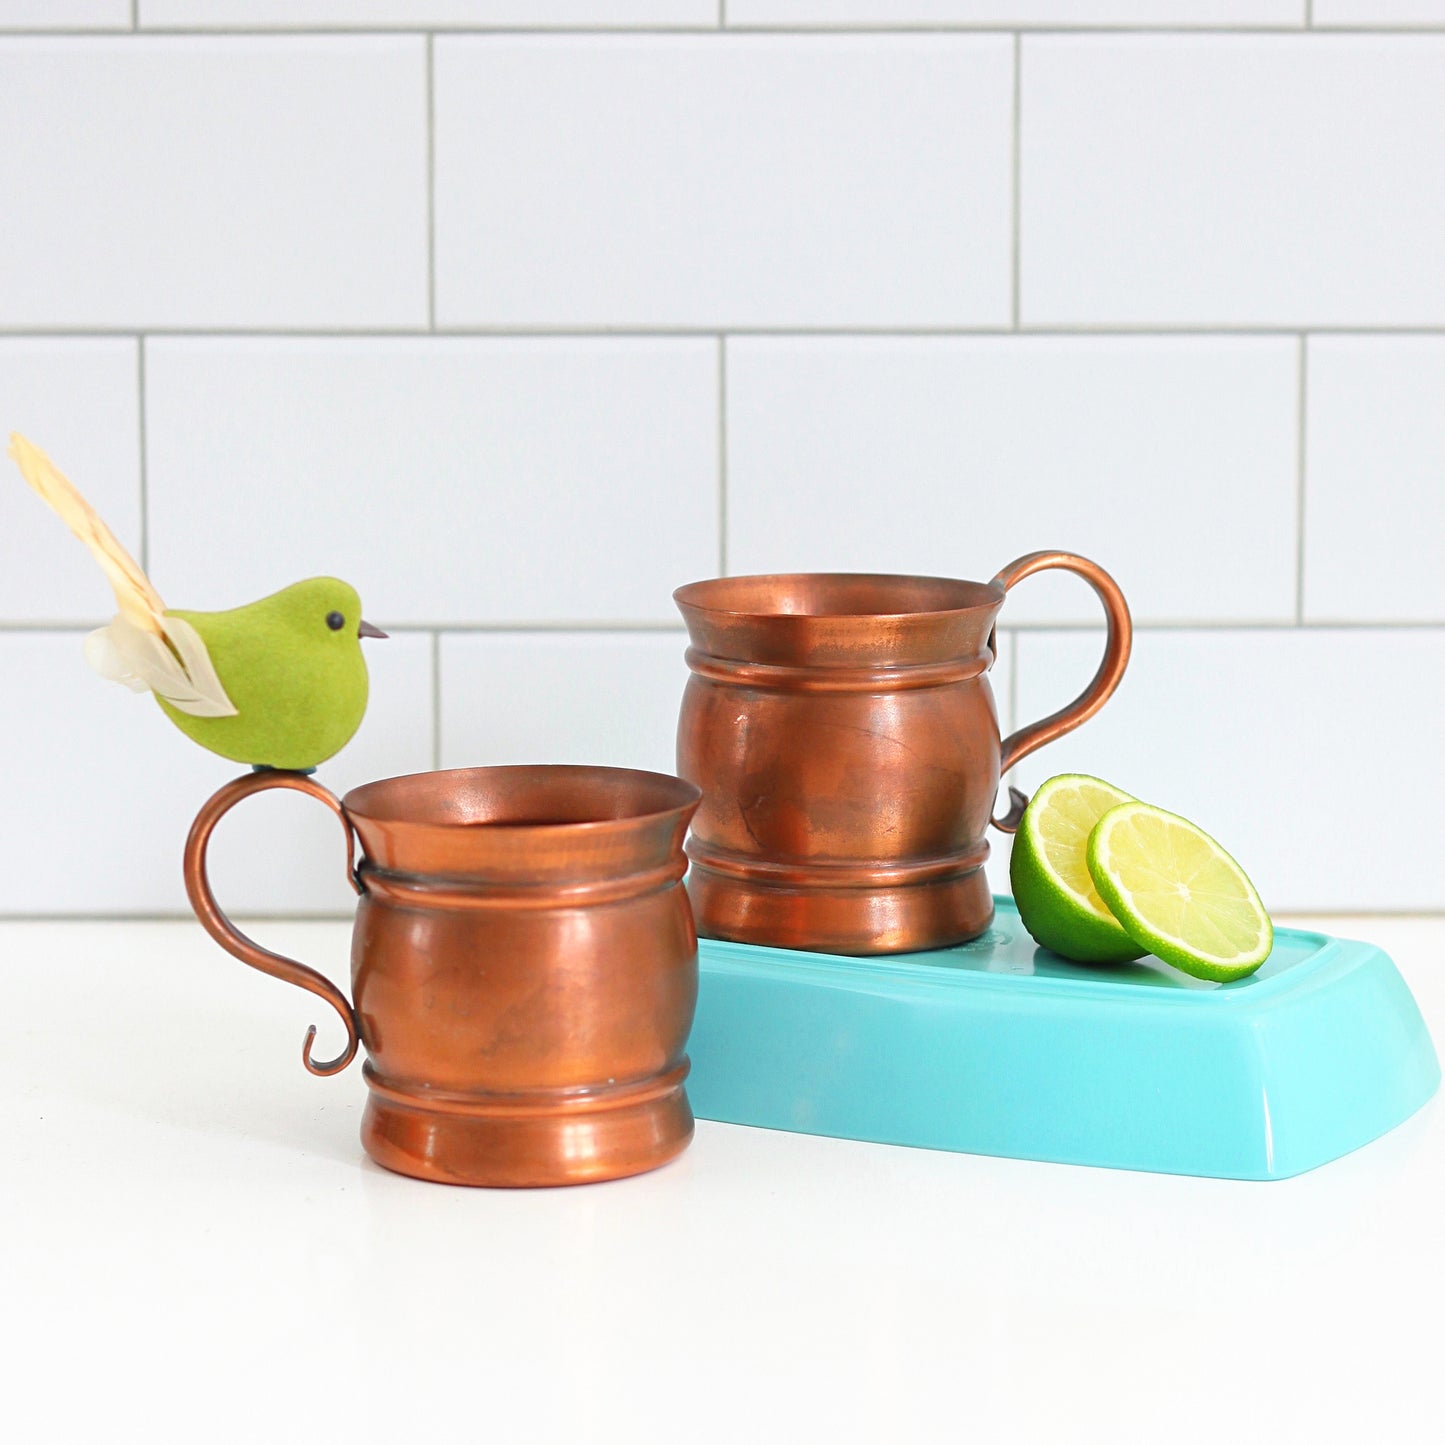 SOLD - Vintage Copper Moscow Mule Mugs